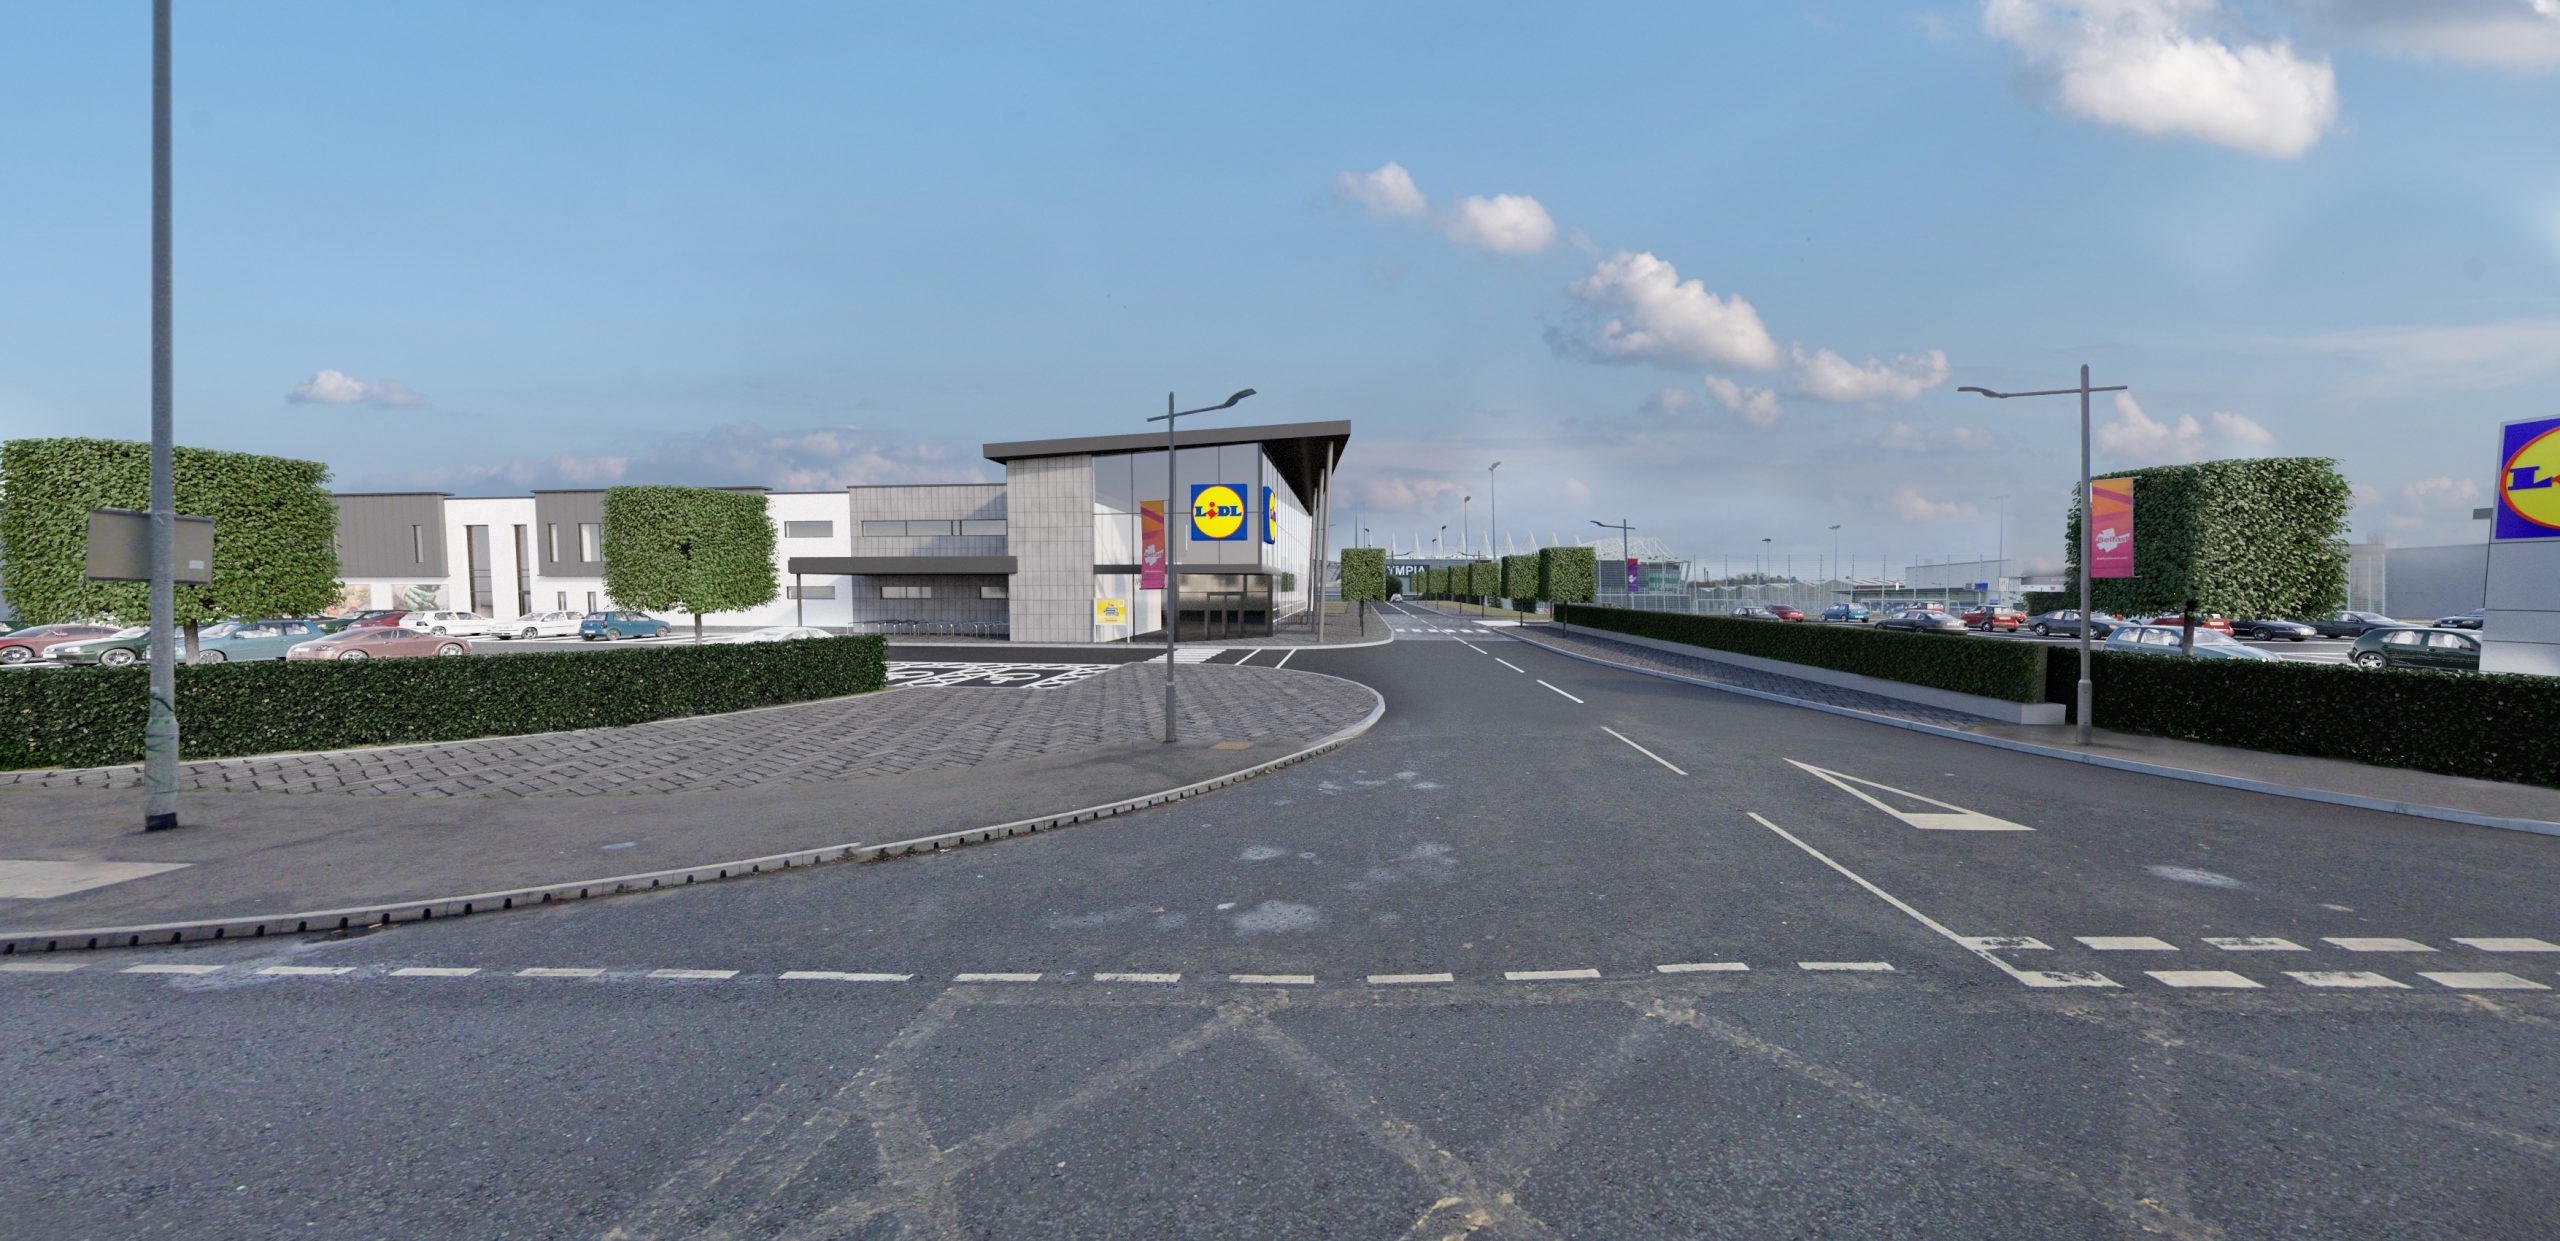 Lidl NI lodges plans for a new £6m store in south Belfast